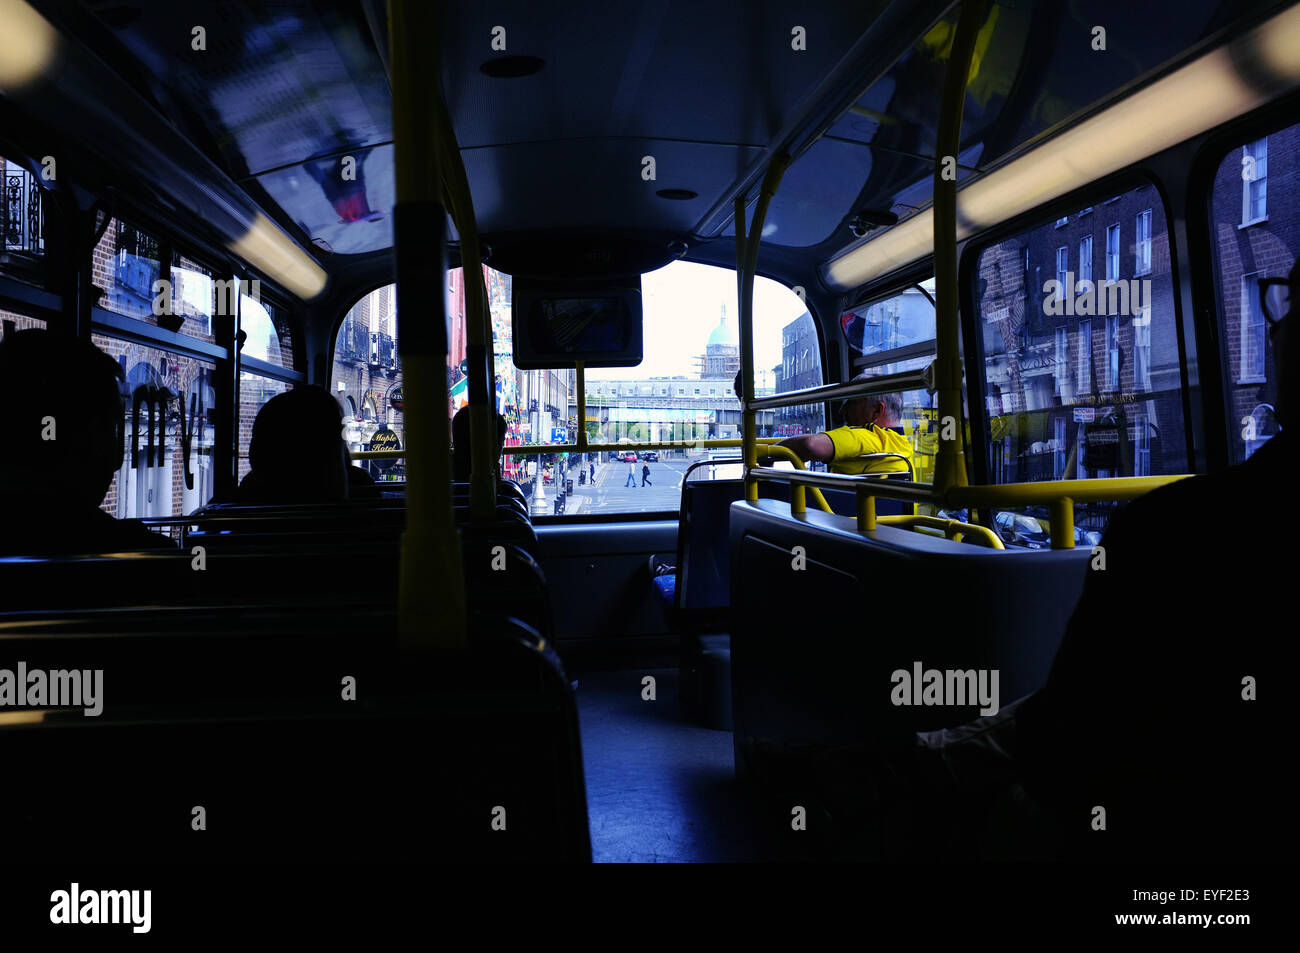 The view inside the top deck of a double decker bus in Dublin, Ireland. Stock Photo